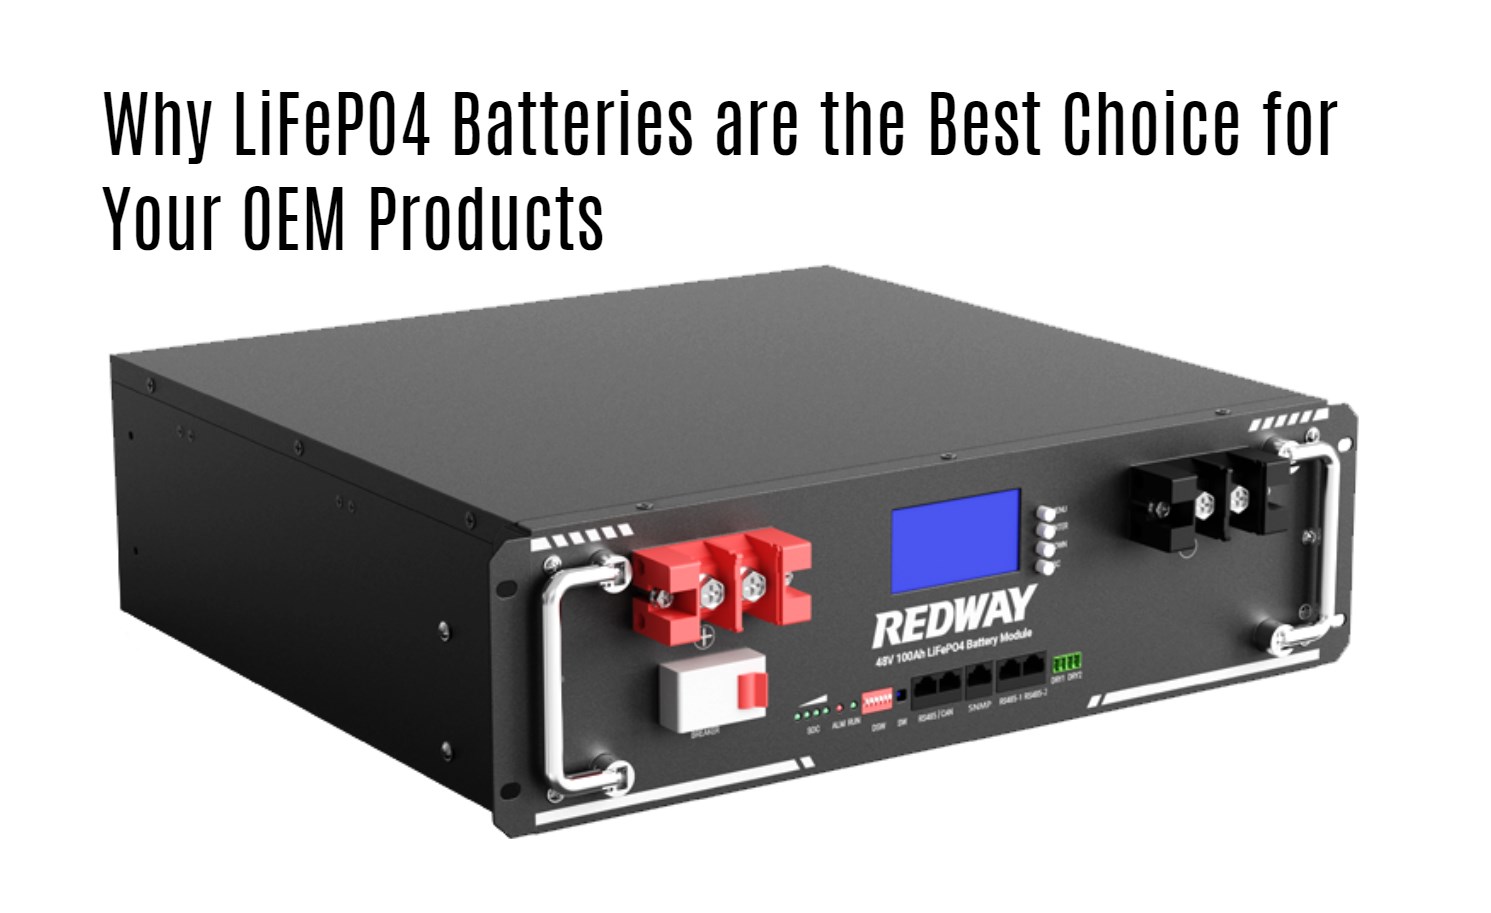 Why LiFePO4 Batteries are the Best Choice for Your OEM Products